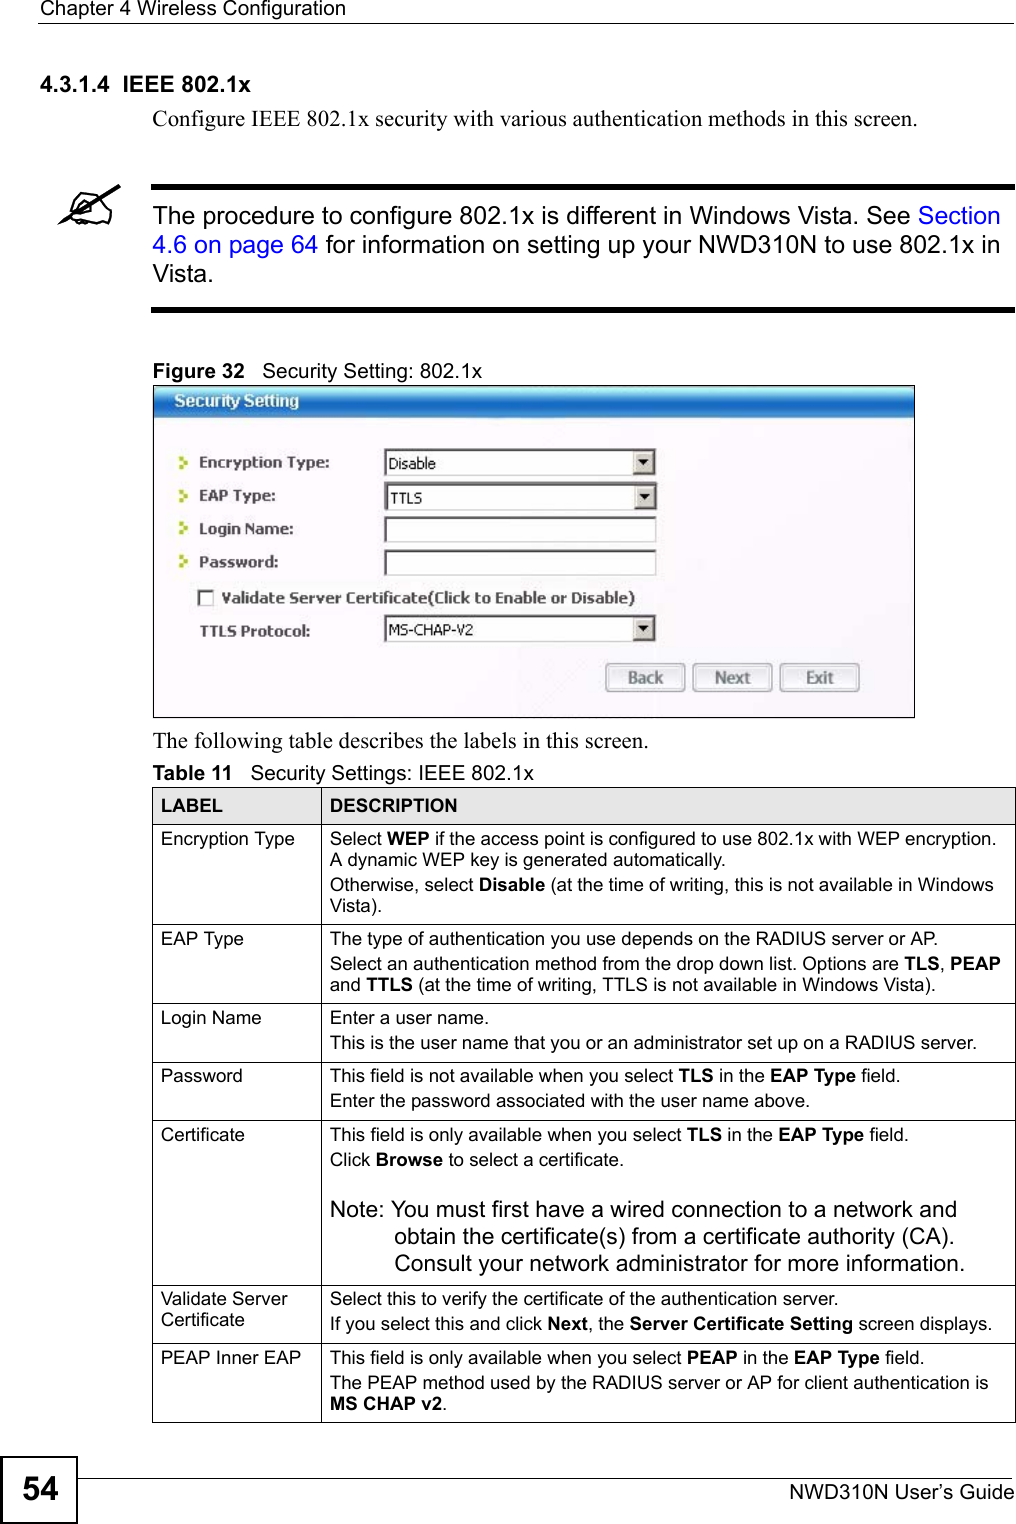 Chapter 4 Wireless ConfigurationNWD310N User’s Guide544.3.1.4  IEEE 802.1xConfigure IEEE 802.1x security with various authentication methods in this screen. &quot;The procedure to configure 802.1x is different in Windows Vista. See Section 4.6 on page 64 for information on setting up your NWD310N to use 802.1x in Vista.Figure 32   Security Setting: 802.1x The following table describes the labels in this screen.  Table 11   Security Settings: IEEE 802.1xLABEL DESCRIPTIONEncryption Type Select WEP if the access point is configured to use 802.1x with WEP encryption. A dynamic WEP key is generated automatically.Otherwise, select Disable (at the time of writing, this is not available in Windows Vista).EAP Type The type of authentication you use depends on the RADIUS server or AP.Select an authentication method from the drop down list. Options are TLS, PEAP and TTLS (at the time of writing, TTLS is not available in Windows Vista).Login Name Enter a user name. This is the user name that you or an administrator set up on a RADIUS server.Password This field is not available when you select TLS in the EAP Type field. Enter the password associated with the user name above. Certificate This field is only available when you select TLS in the EAP Type field. Click Browse to select a certificate.Note: You must first have a wired connection to a network and obtain the certificate(s) from a certificate authority (CA). Consult your network administrator for more information.Validate Server CertificateSelect this to verify the certificate of the authentication server. If you select this and click Next, the Server Certificate Setting screen displays. PEAP Inner EAP This field is only available when you select PEAP in the EAP Type field.The PEAP method used by the RADIUS server or AP for client authentication is MS CHAP v2.